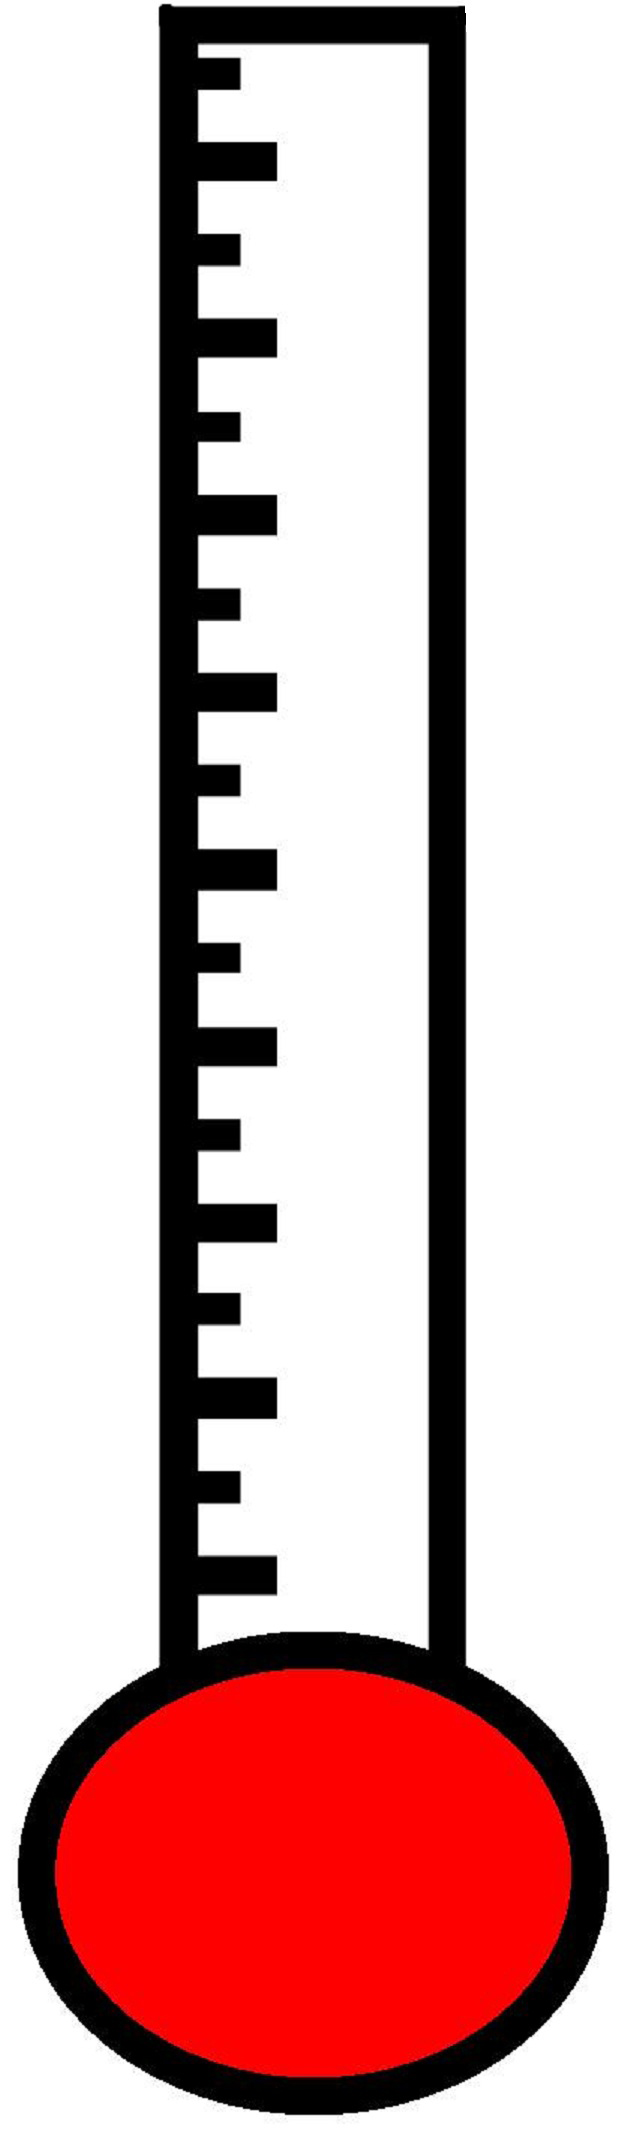 Blank Thermometer Clipart